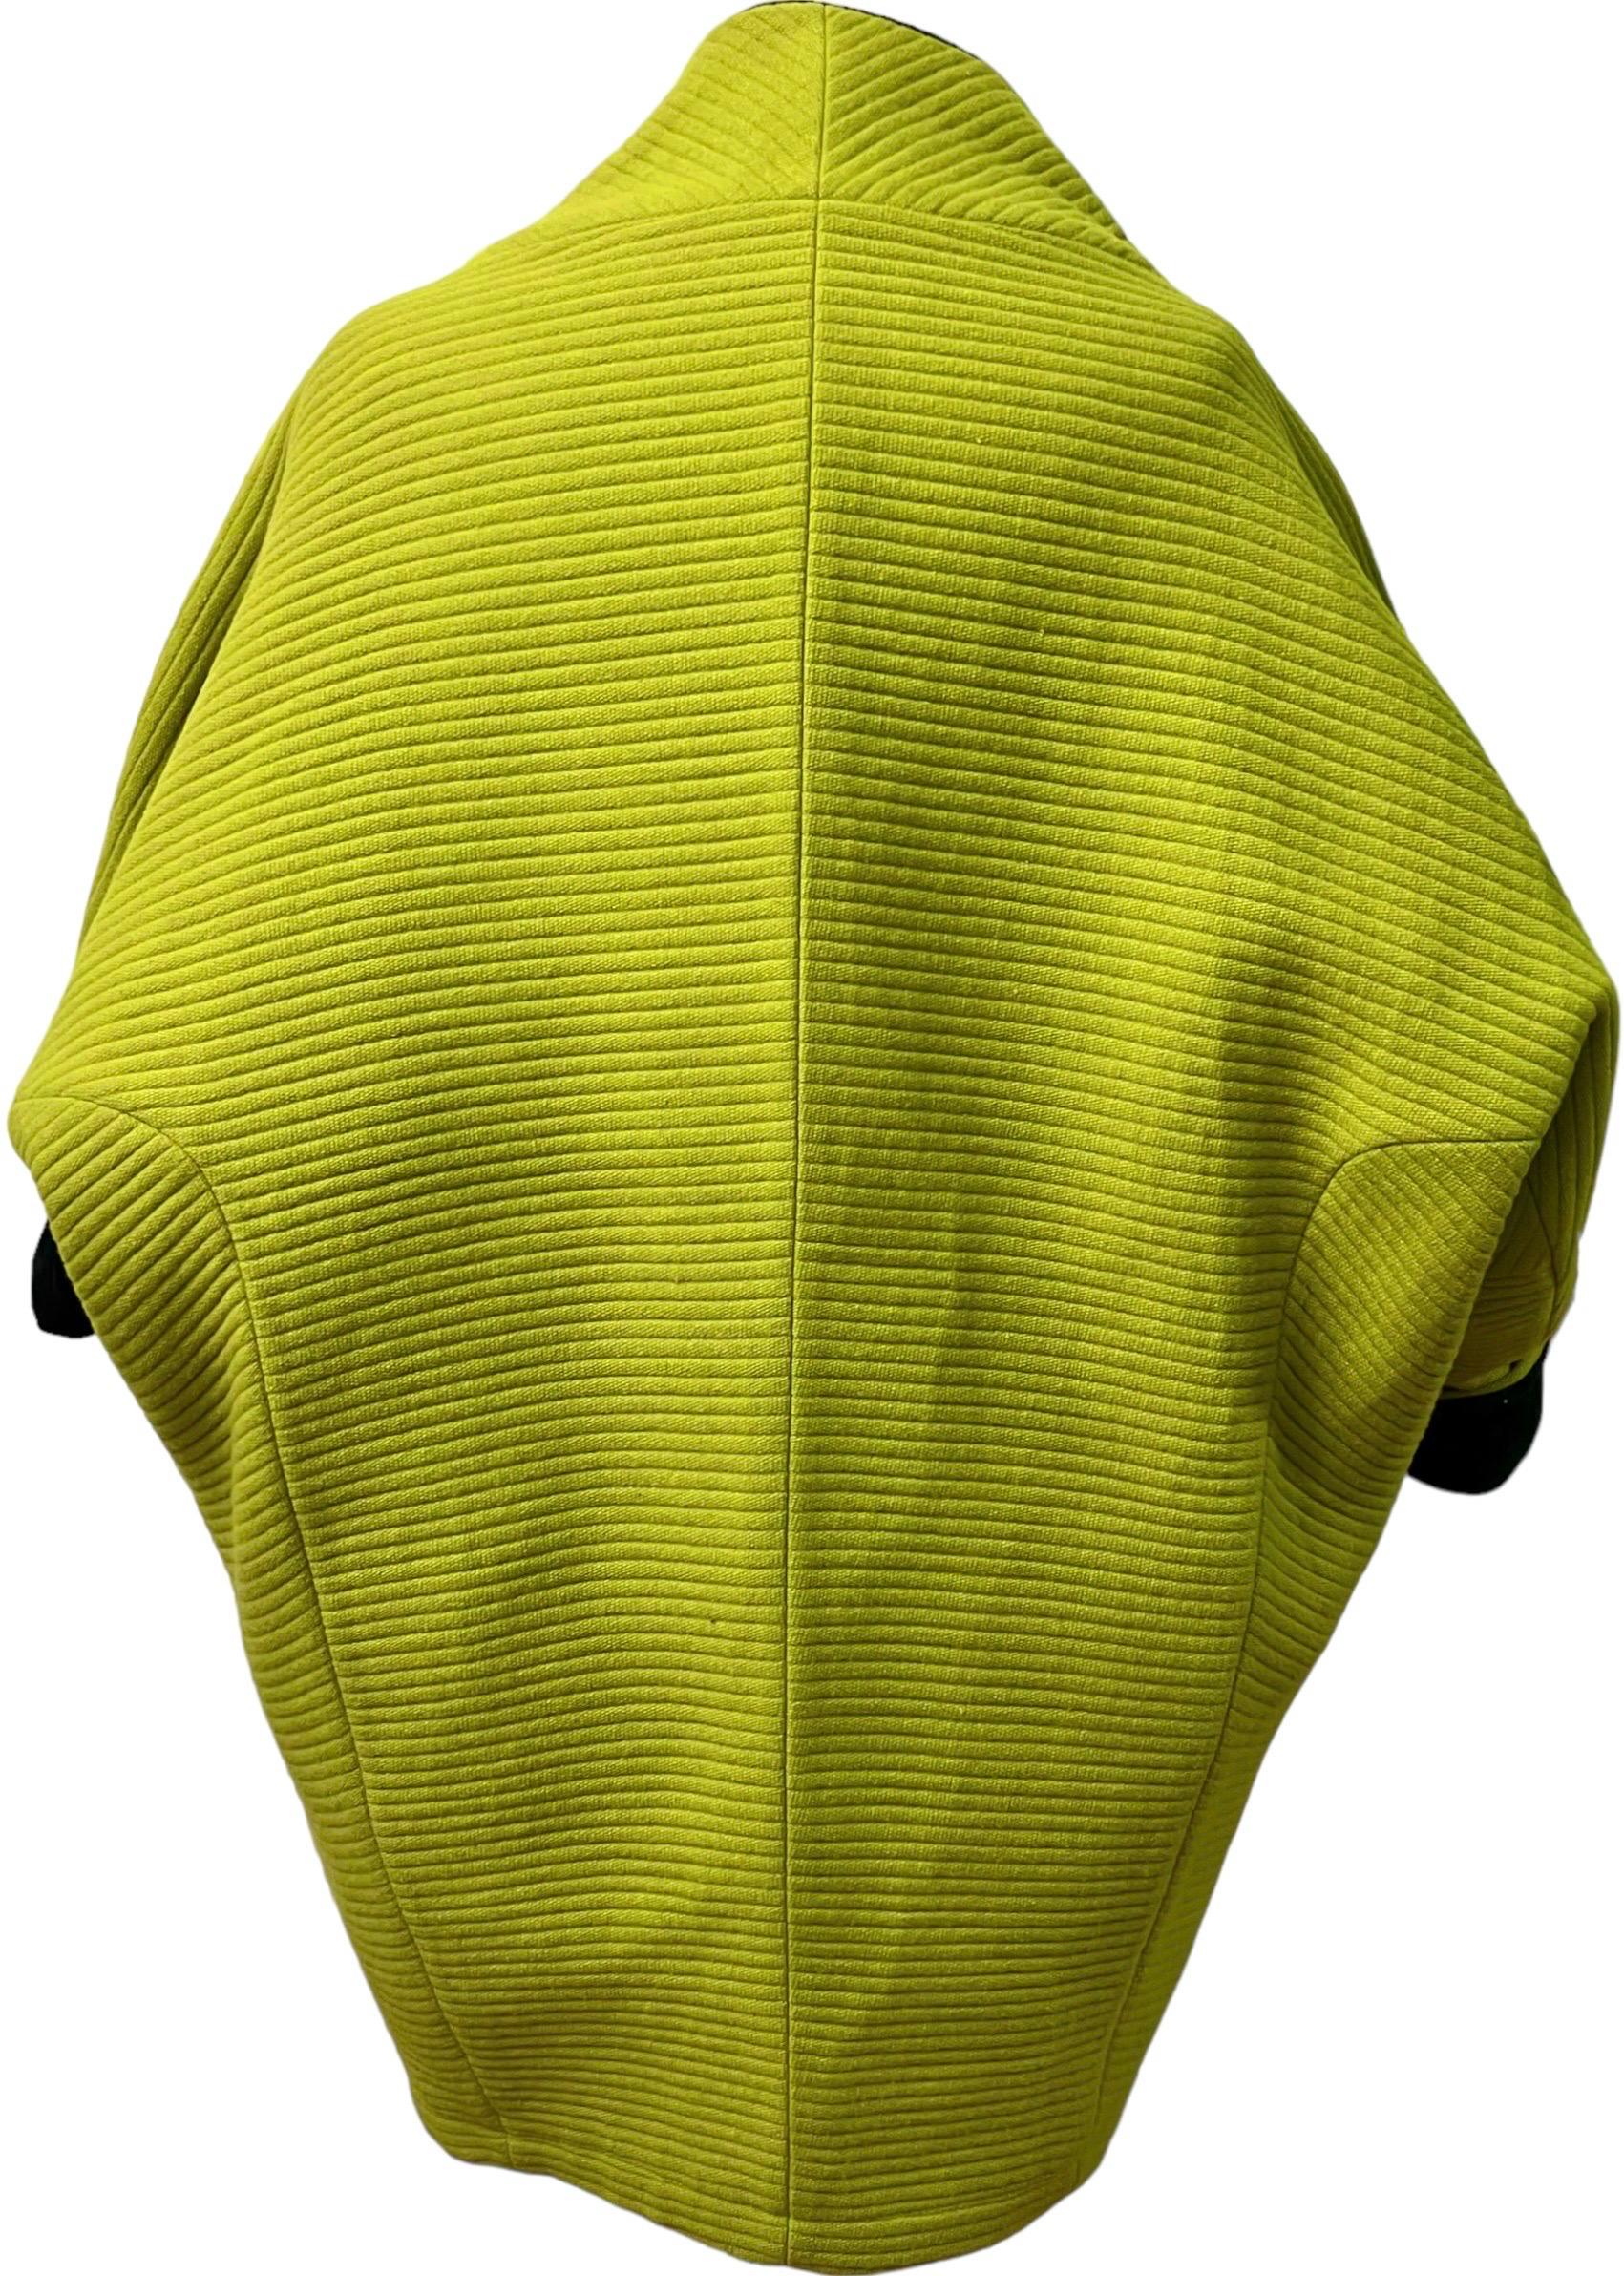 F/W 1990 Thierry Mugler Lime Green Futuristic Cocoon Coat For Sale 5